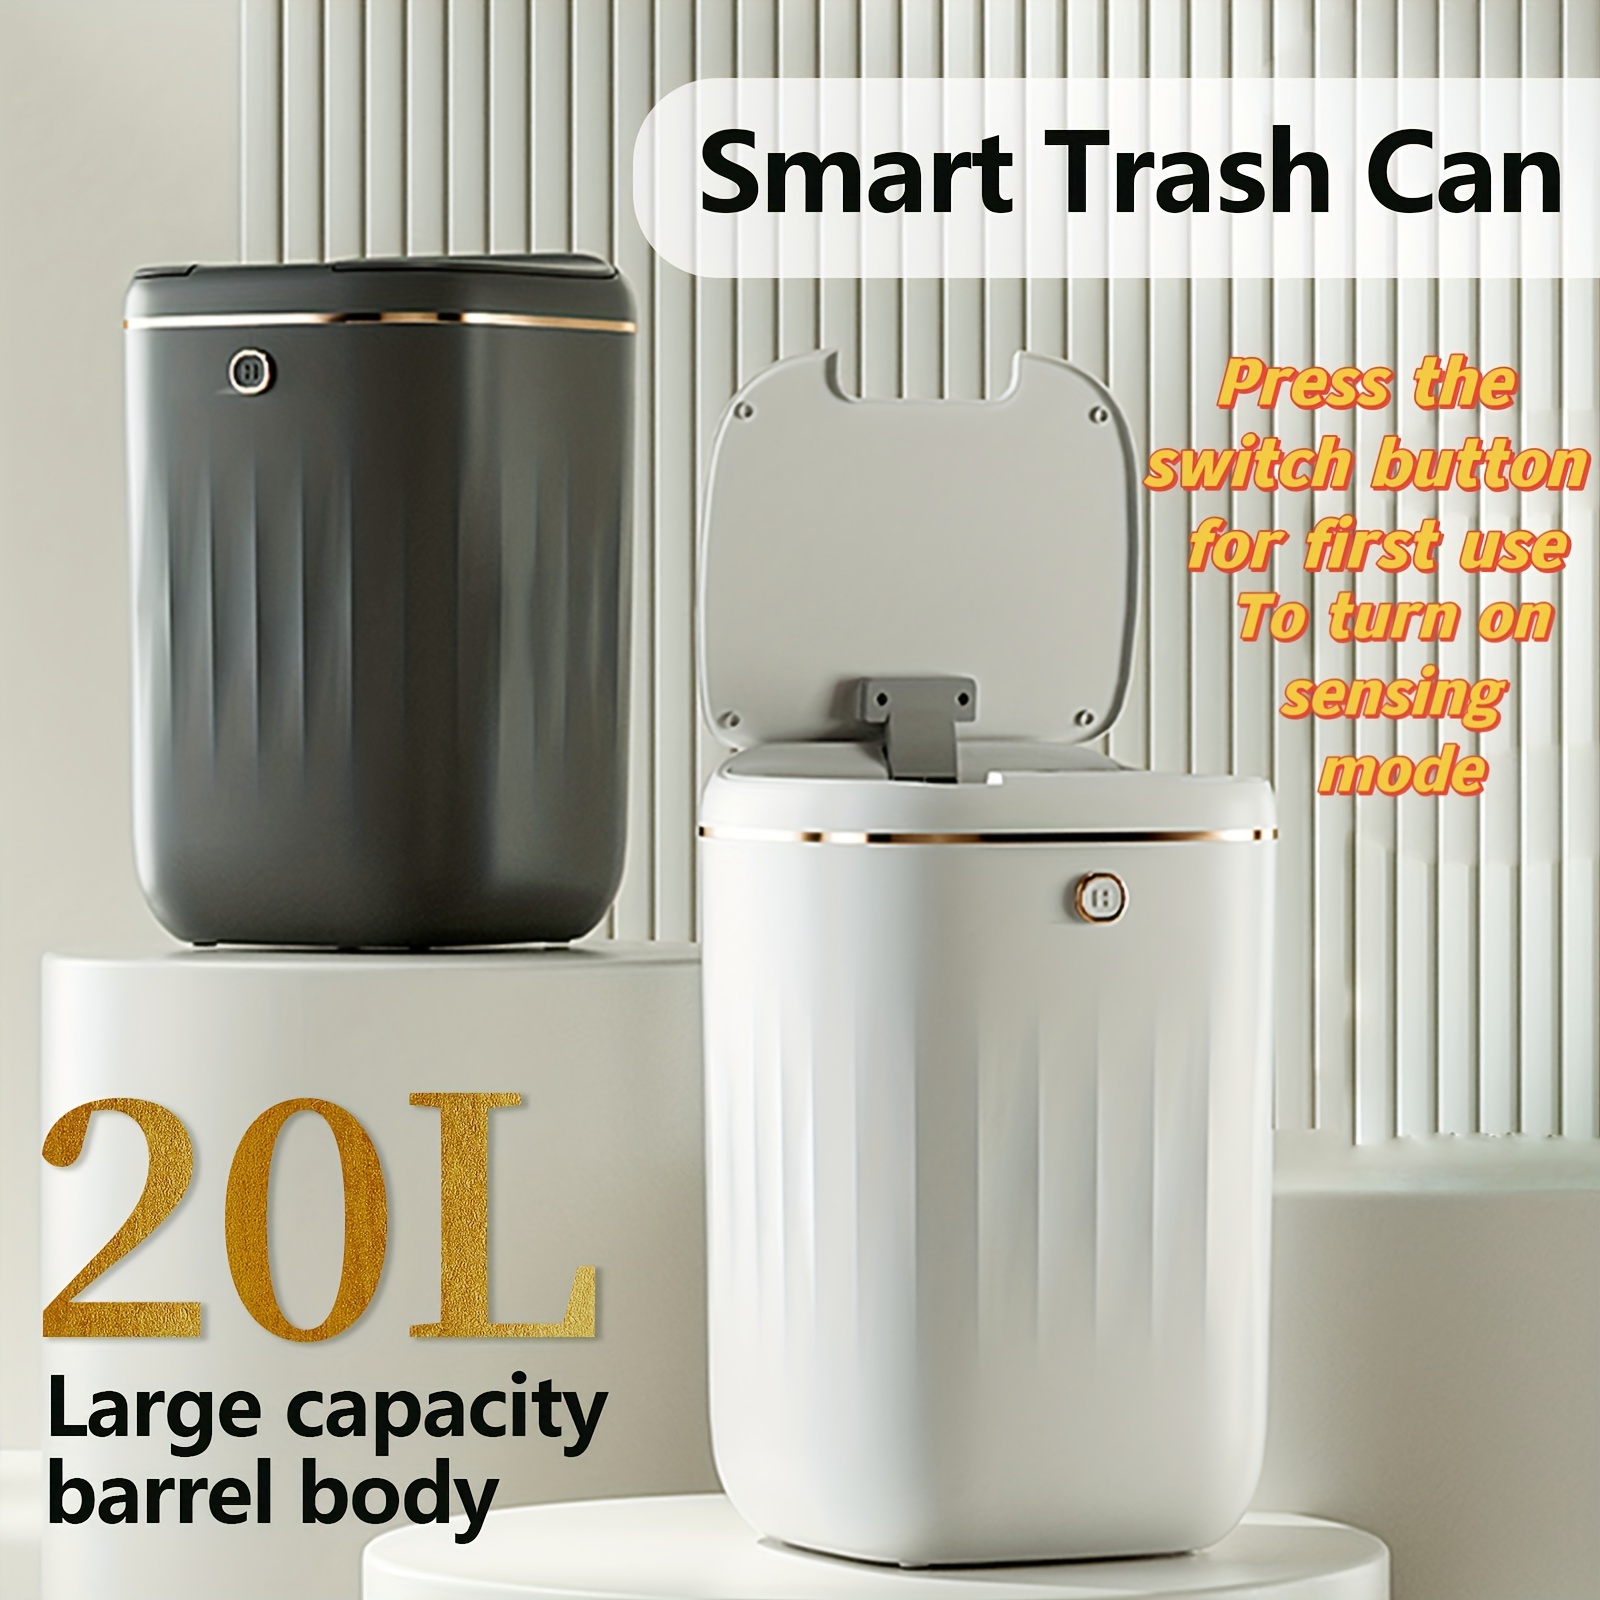 

1pc 20l White/black Smart Trash Can, (4 Aa Batteries Are Not Shipped), Large Capacity Barrel Body, Household - Induction Switch - Electric Trash Can For Kitchen, For Toilet